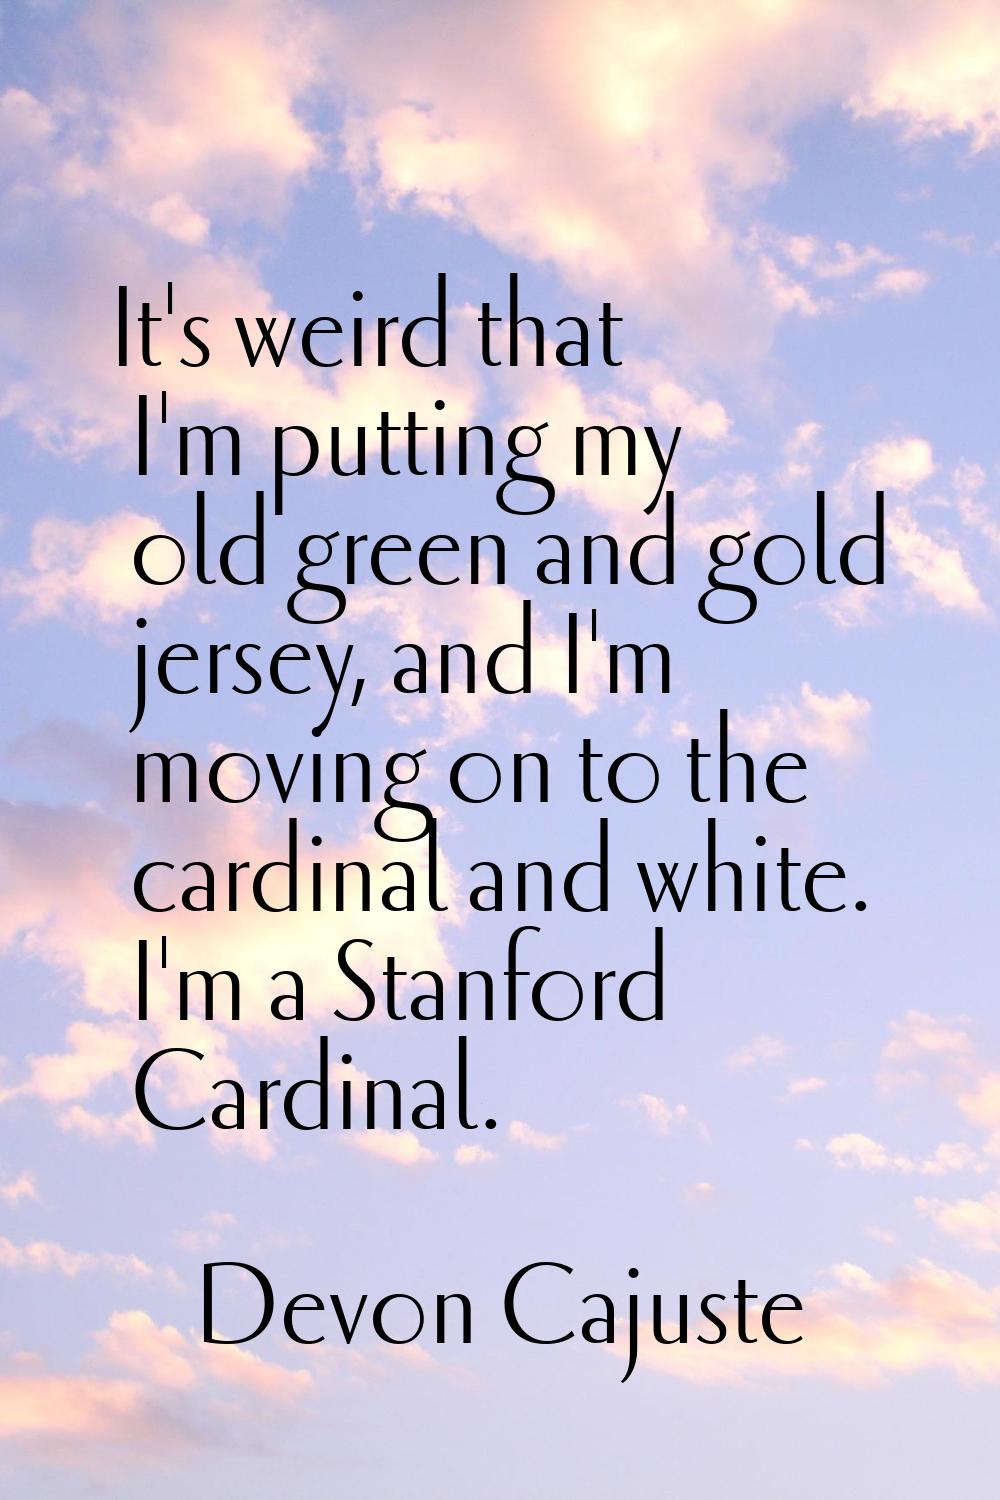 It's weird that I'm putting my old green and gold jersey, and I'm moving on to the cardinal and whi